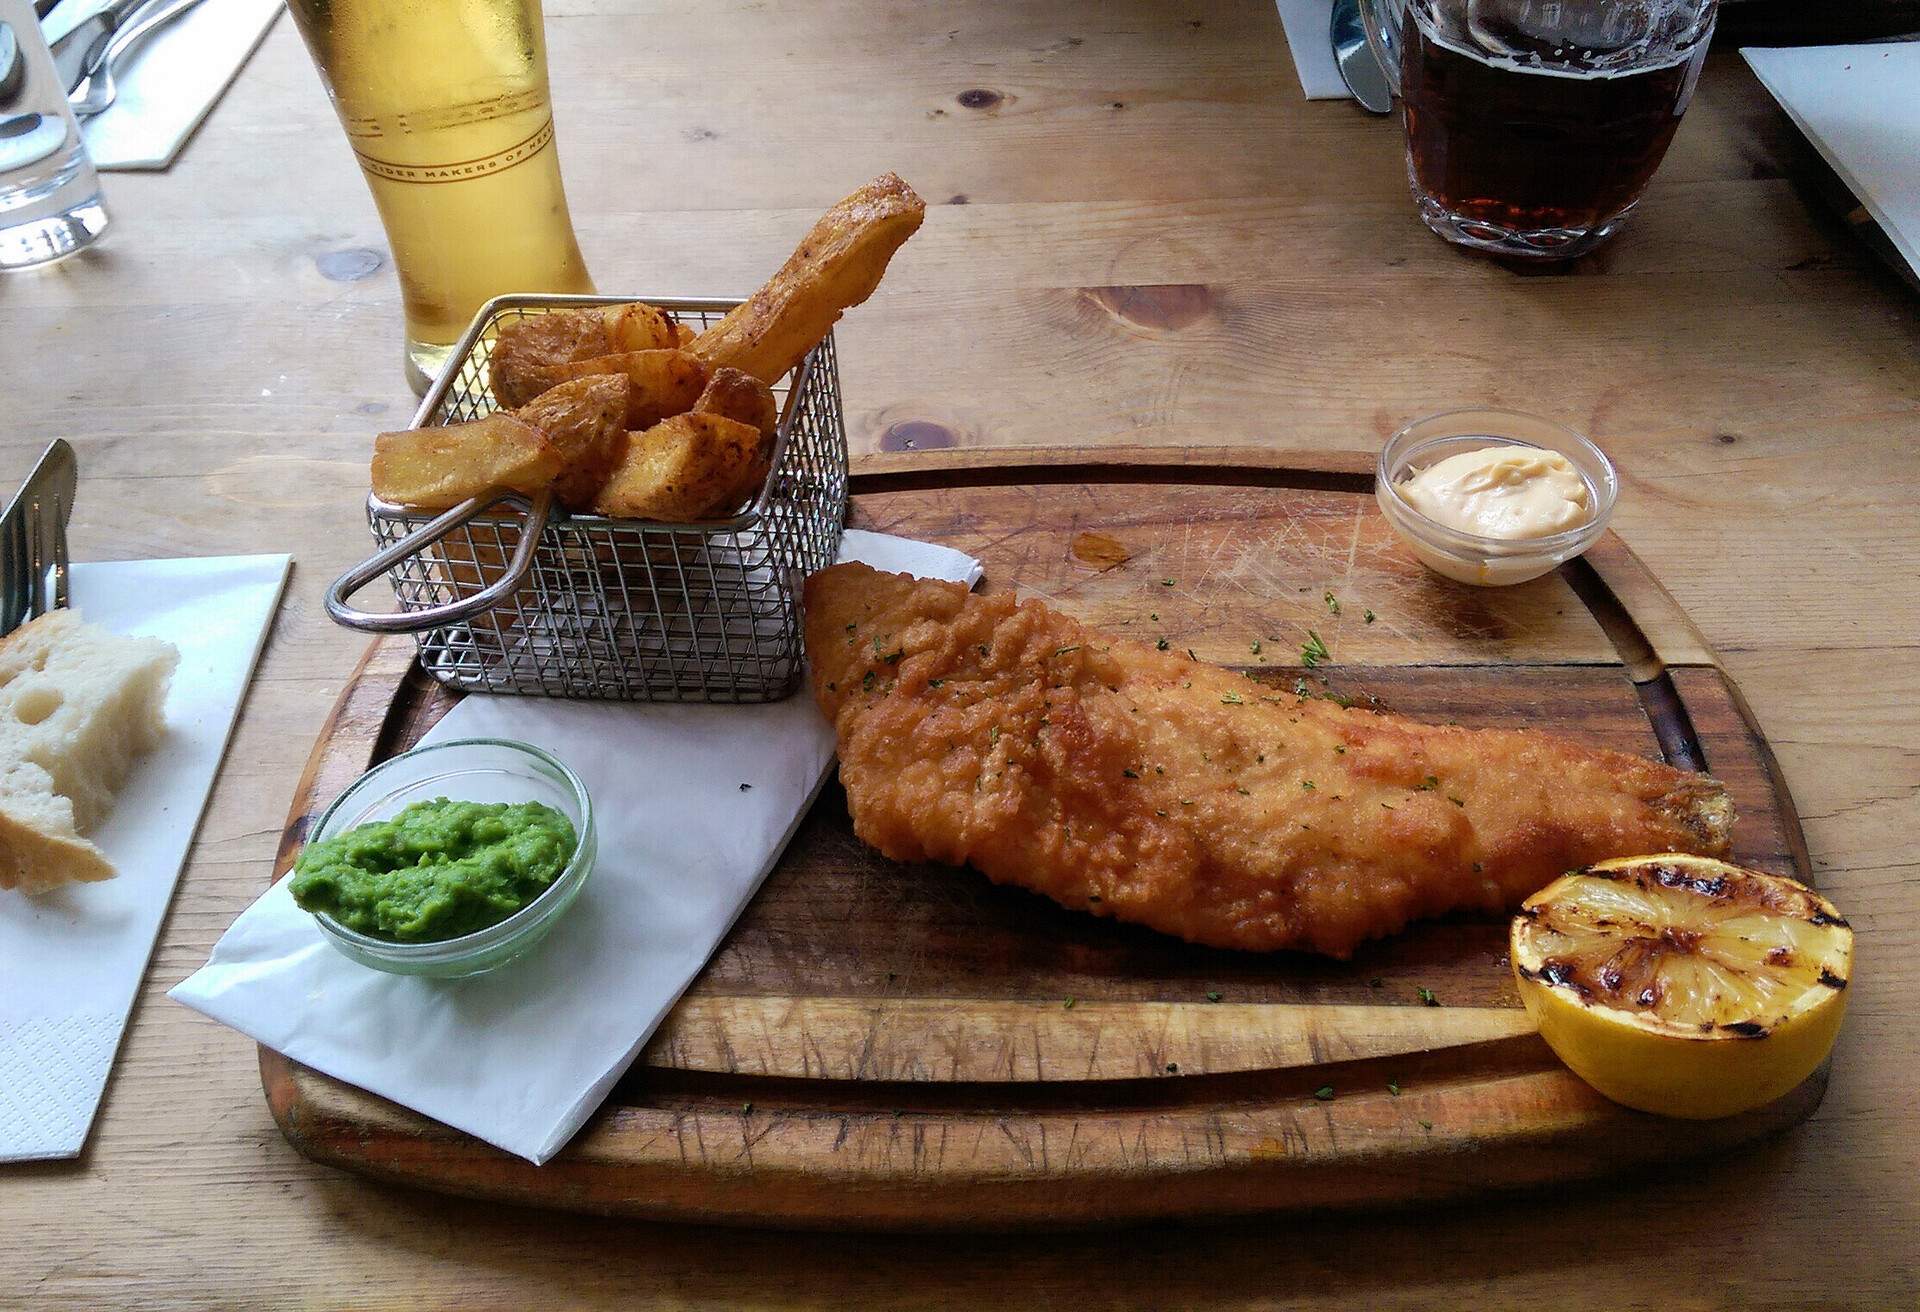 DEST_UK_LONDON_THEME_FOOD_FISH-CHIPS_GettyImages-533459922